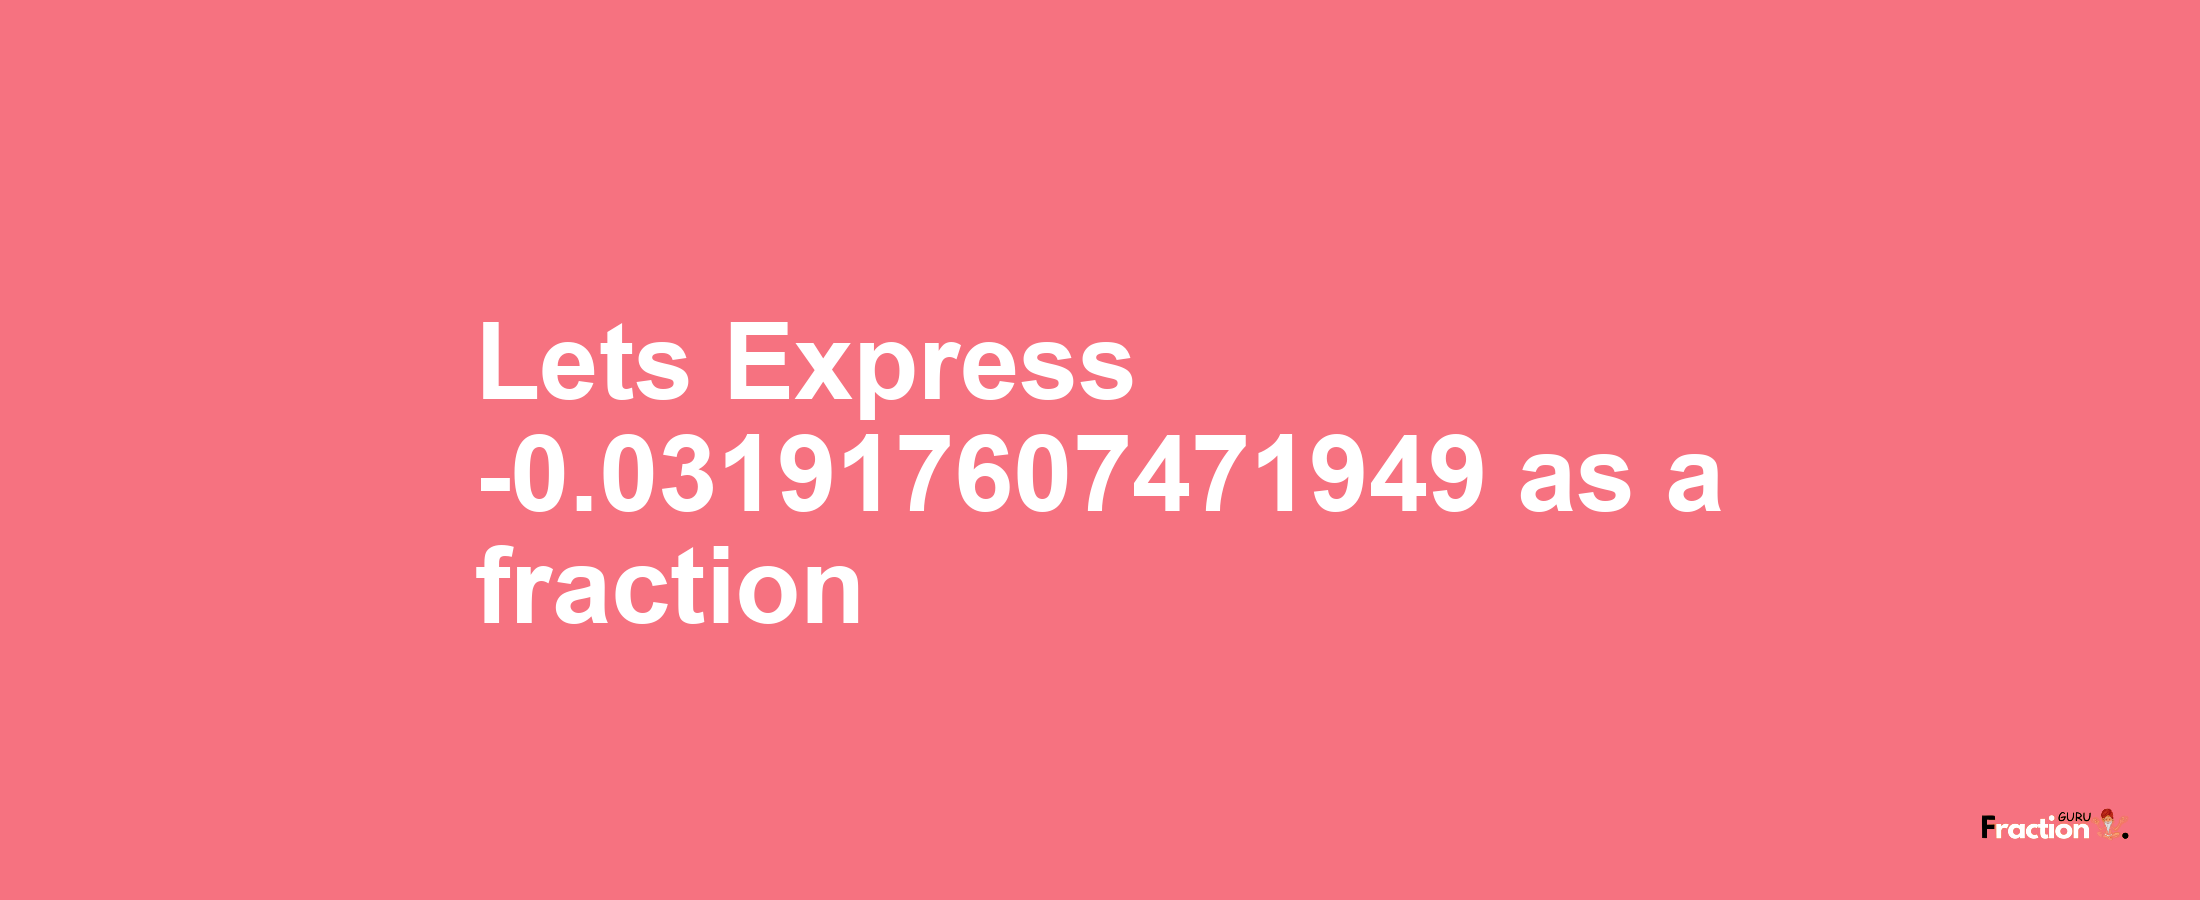 Lets Express -0.031917607471949 as afraction